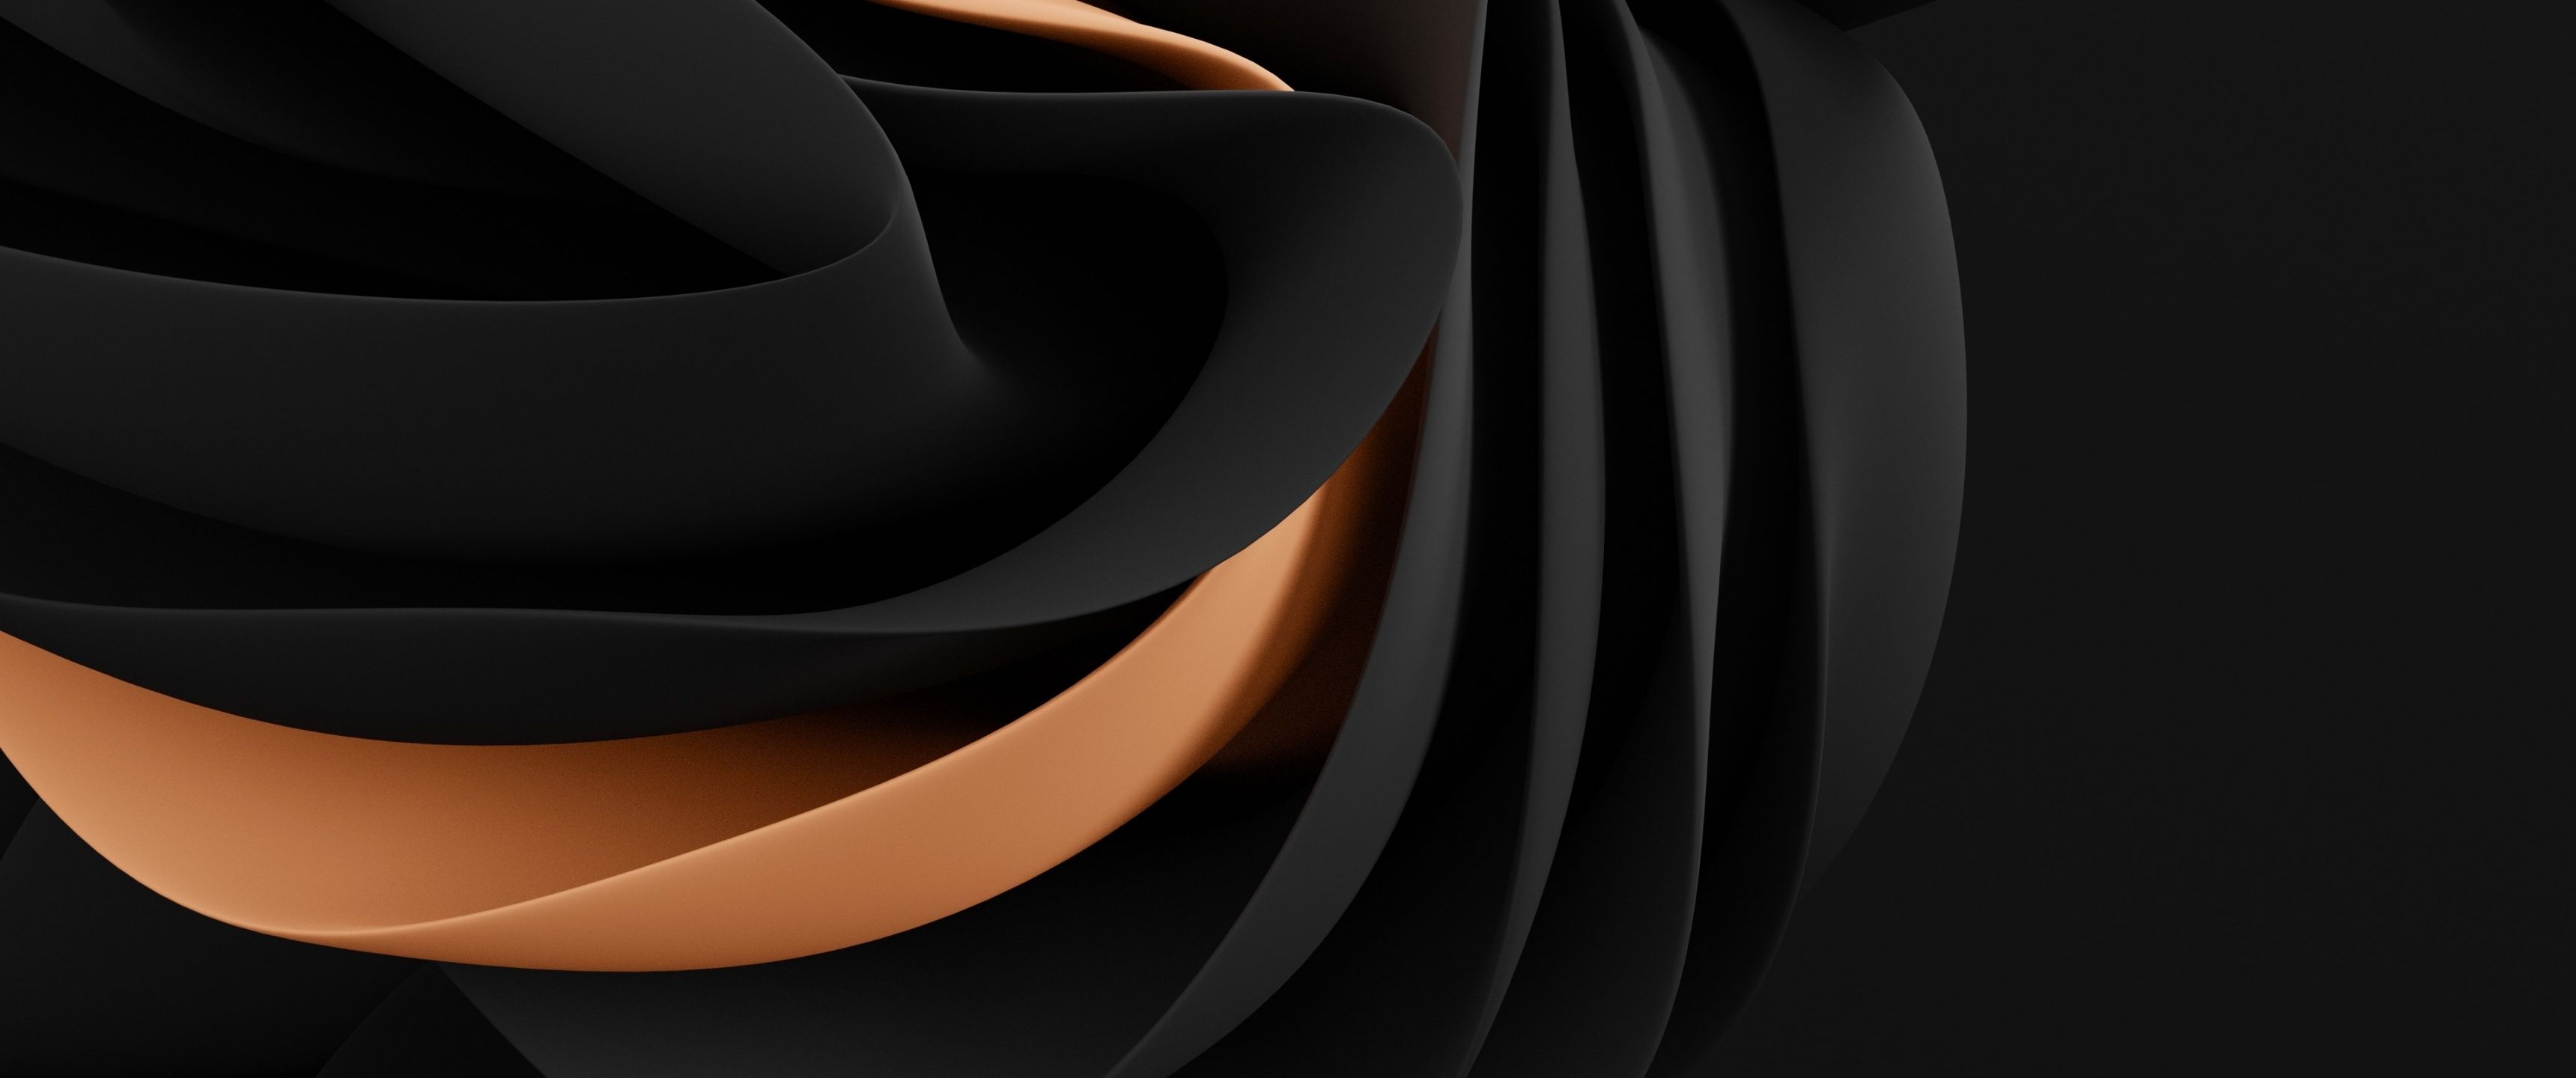 Black and gold abstract wallpaper with a wave - 3440x1440